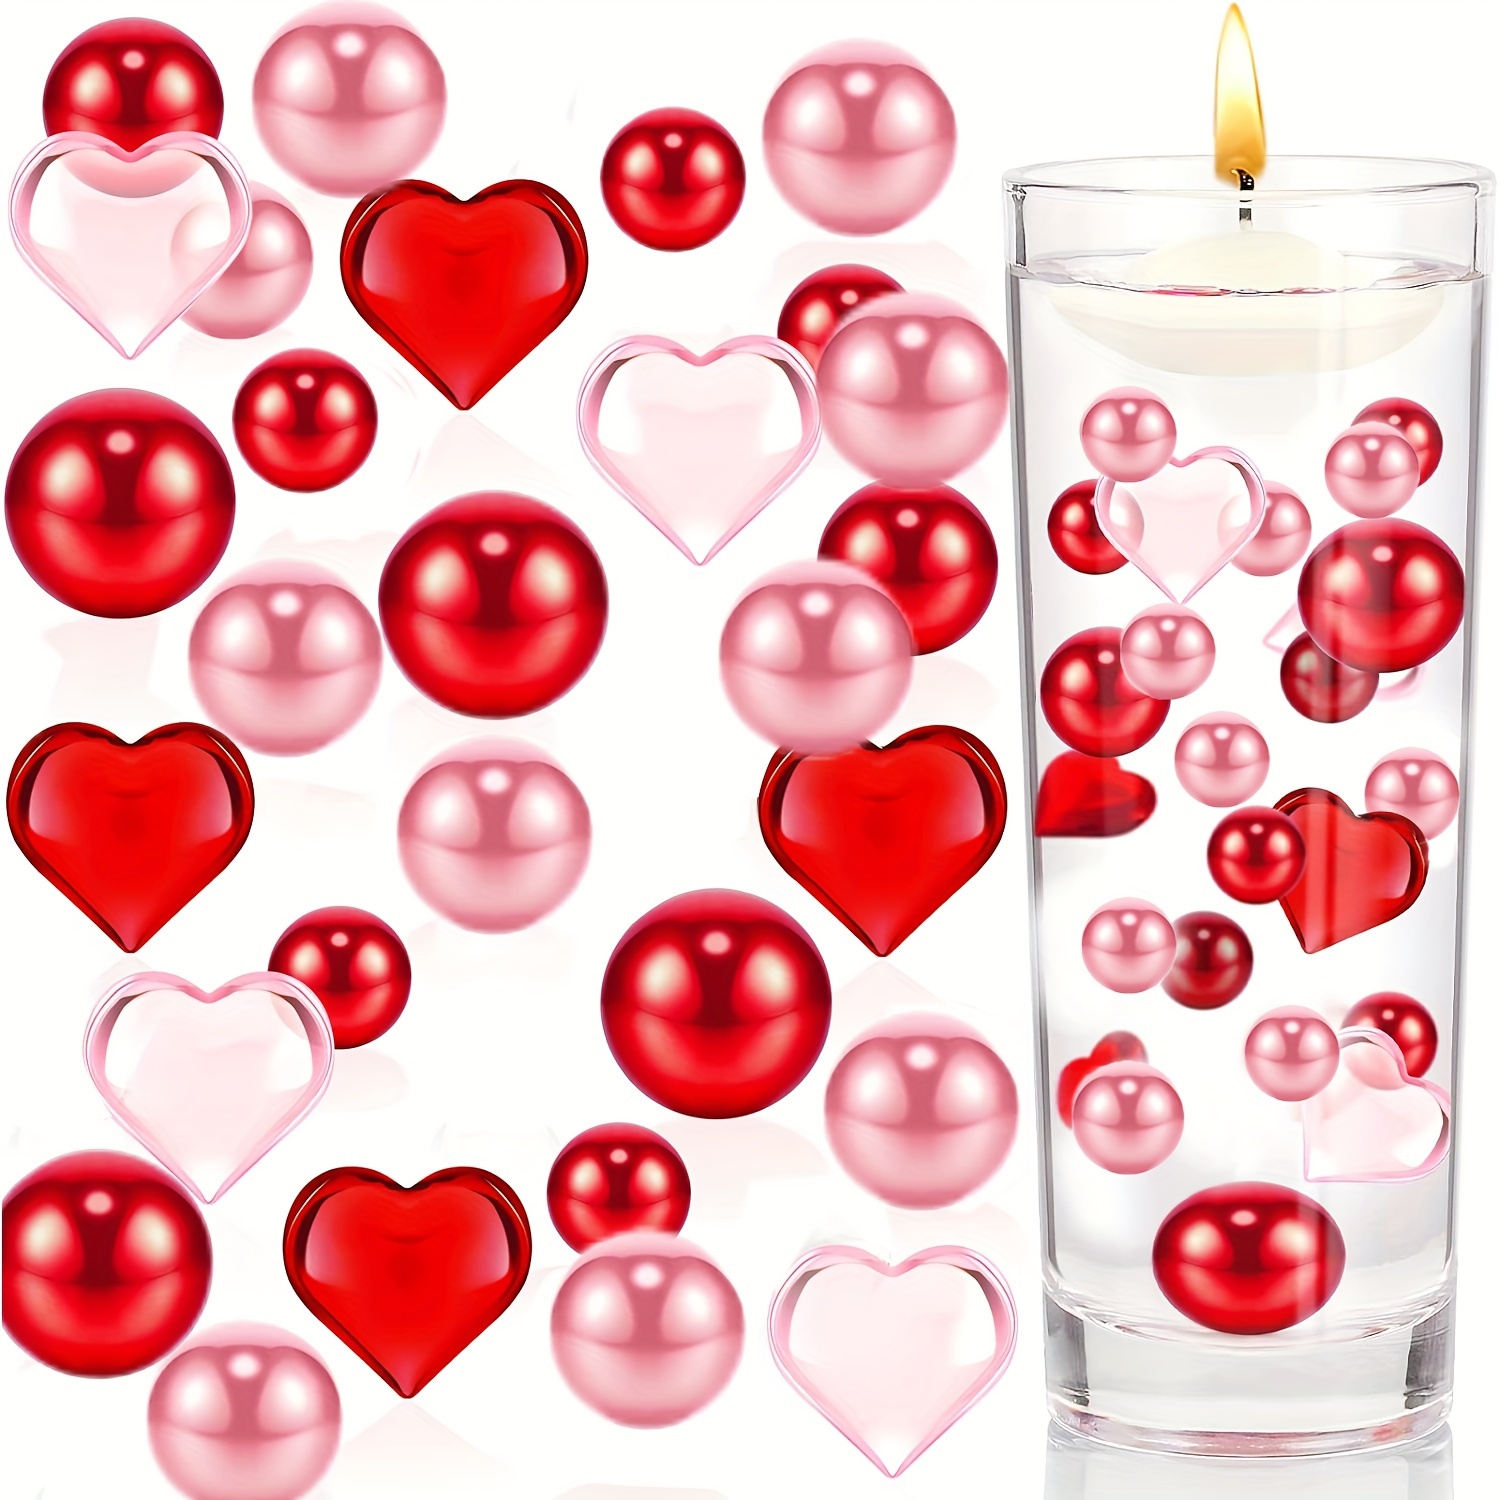 Make Dreamy Heart-Shaped Foton Pearled Candles for Valentine's Day